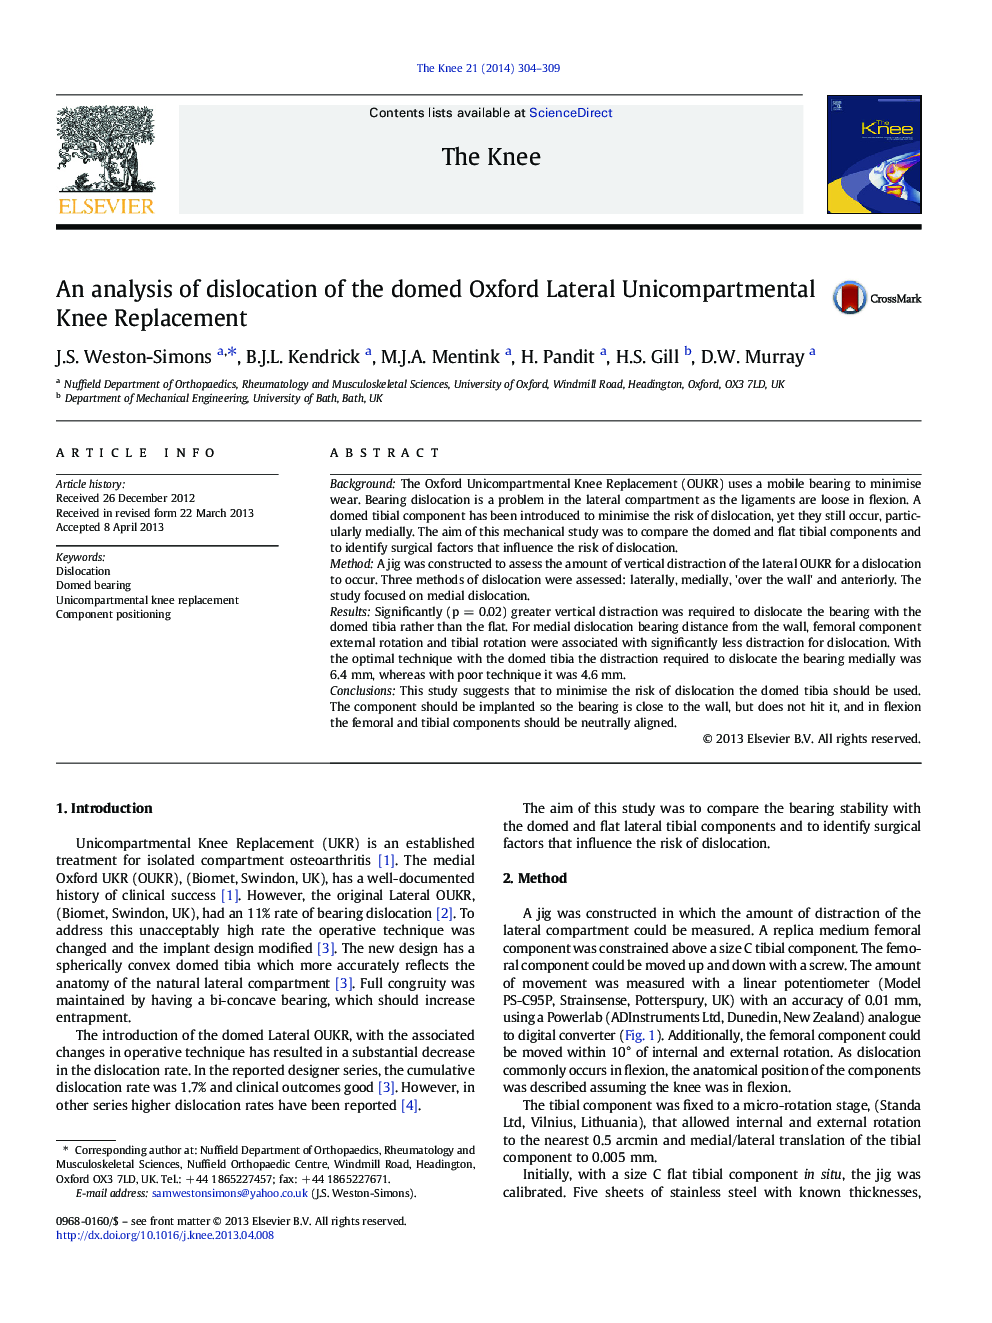 An analysis of dislocation of the domed Oxford Lateral Unicompartmental Knee Replacement